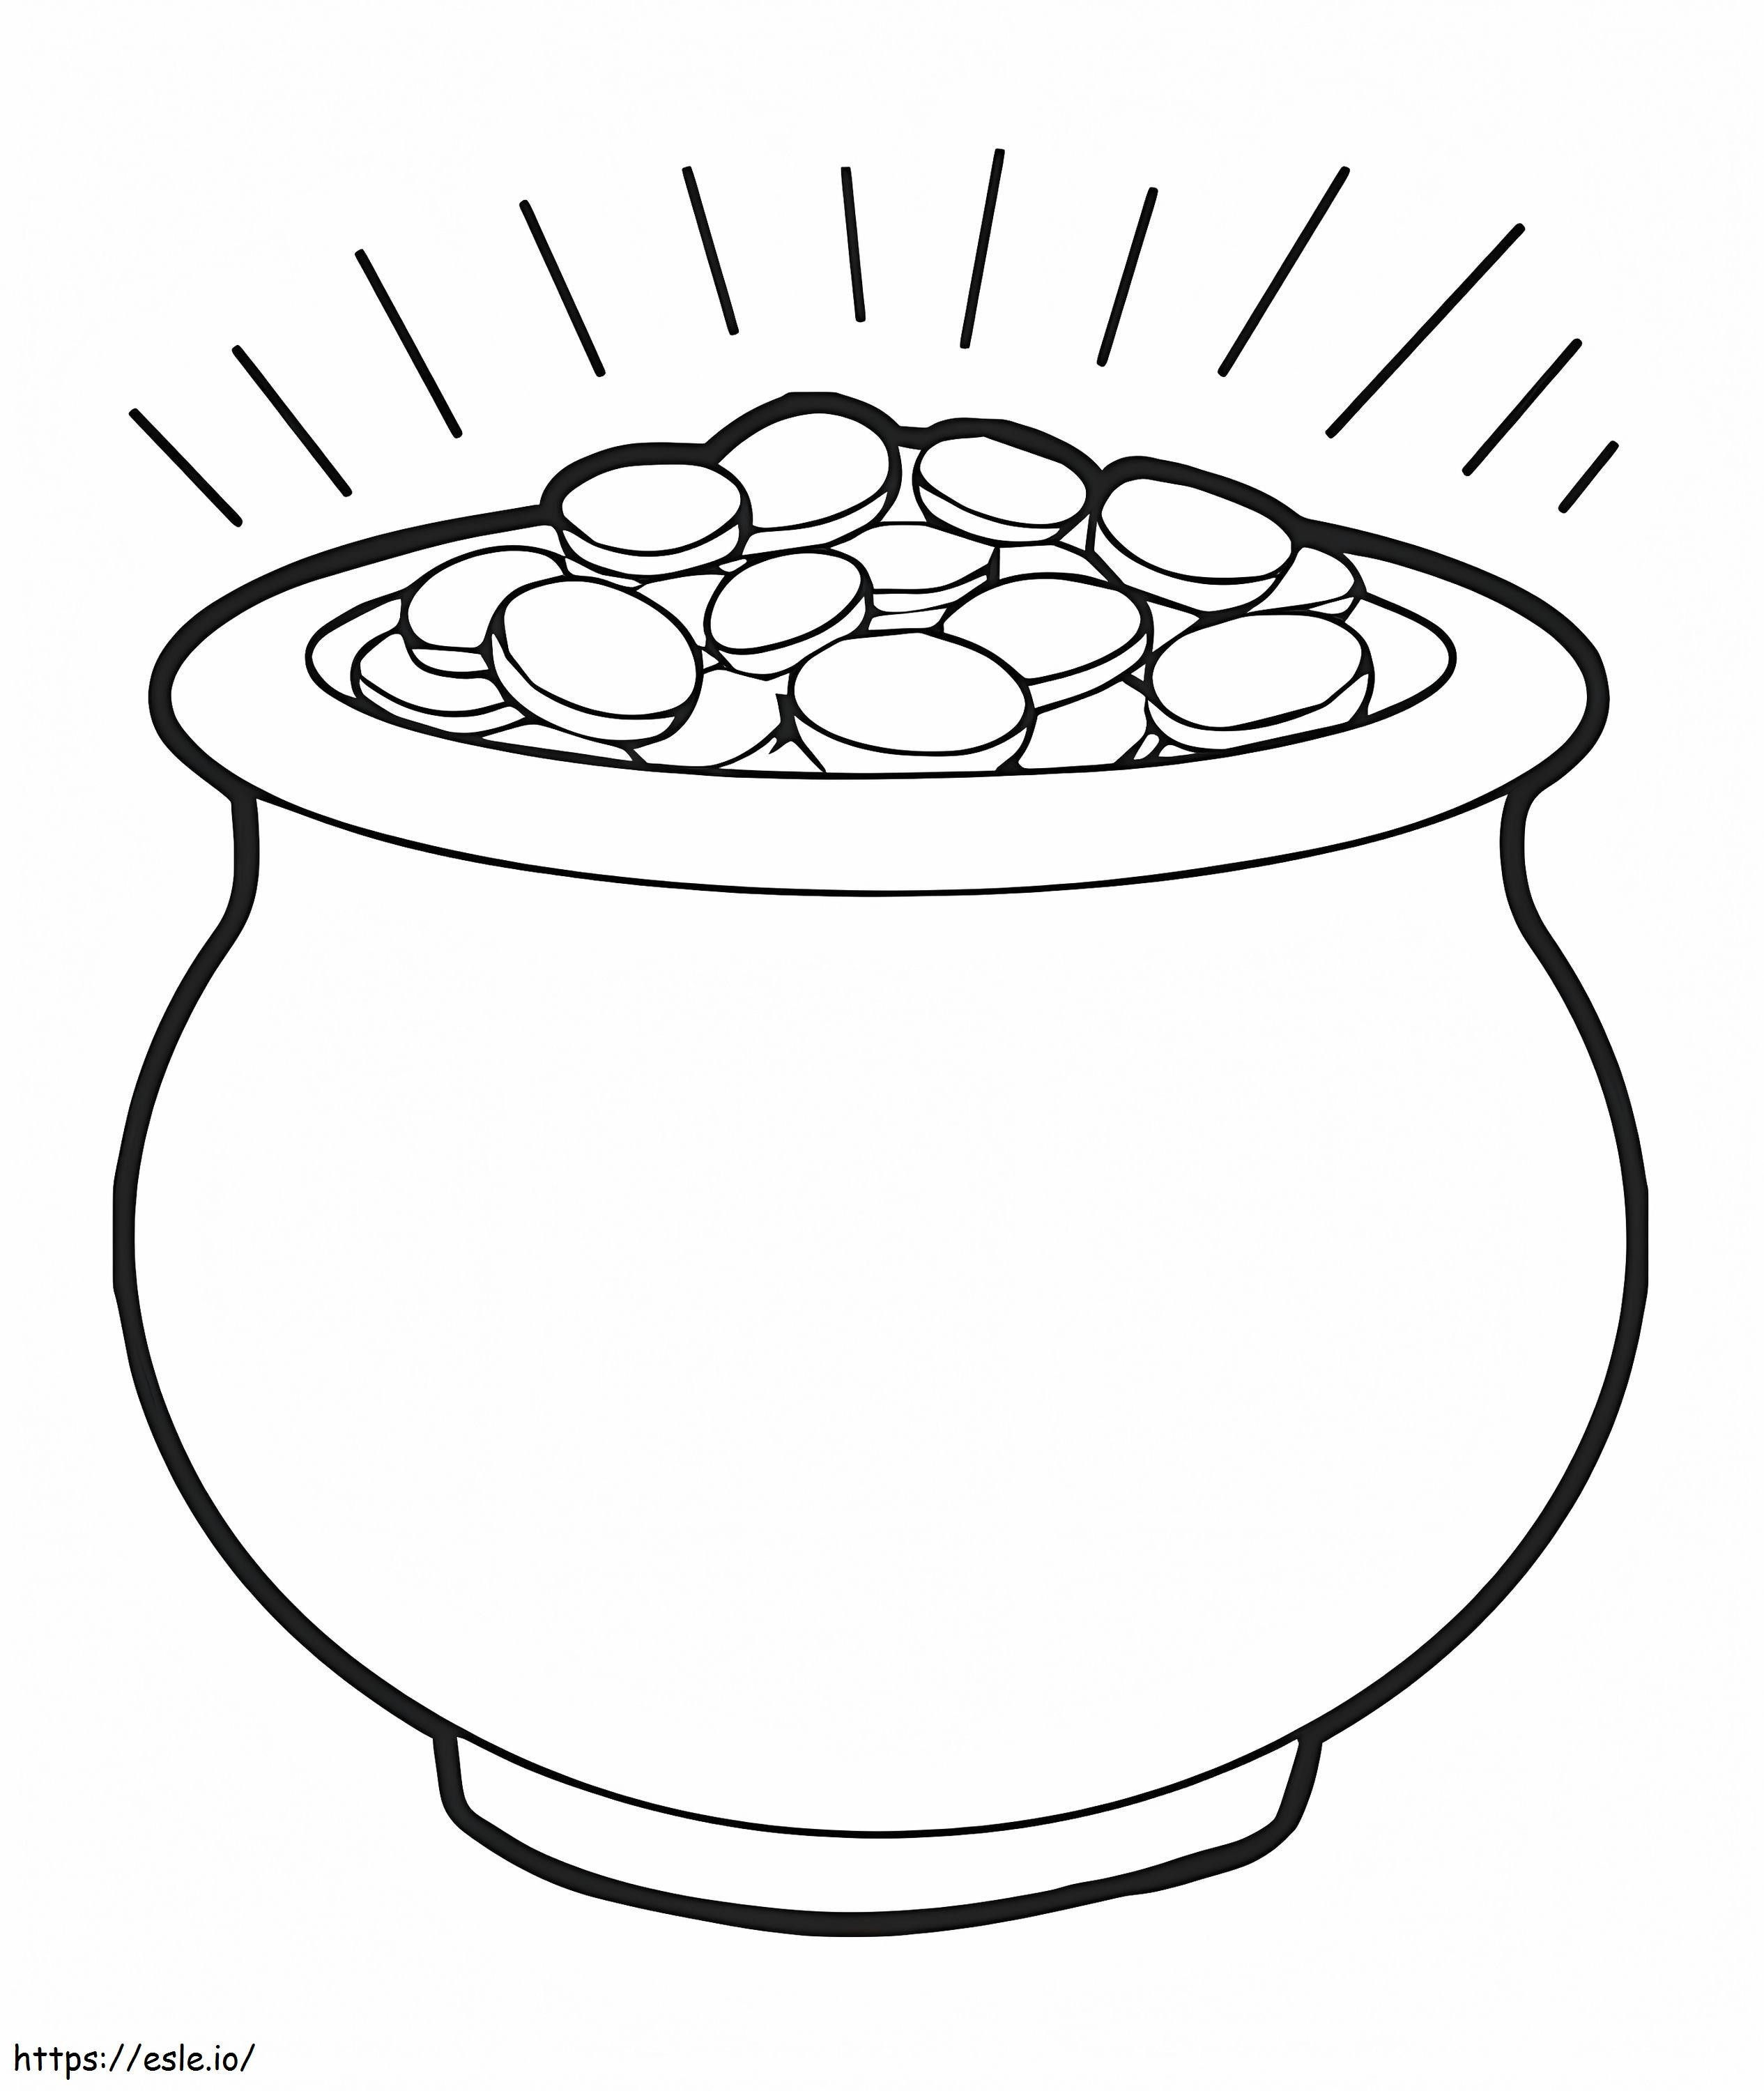 A Pot Of Gold coloring page